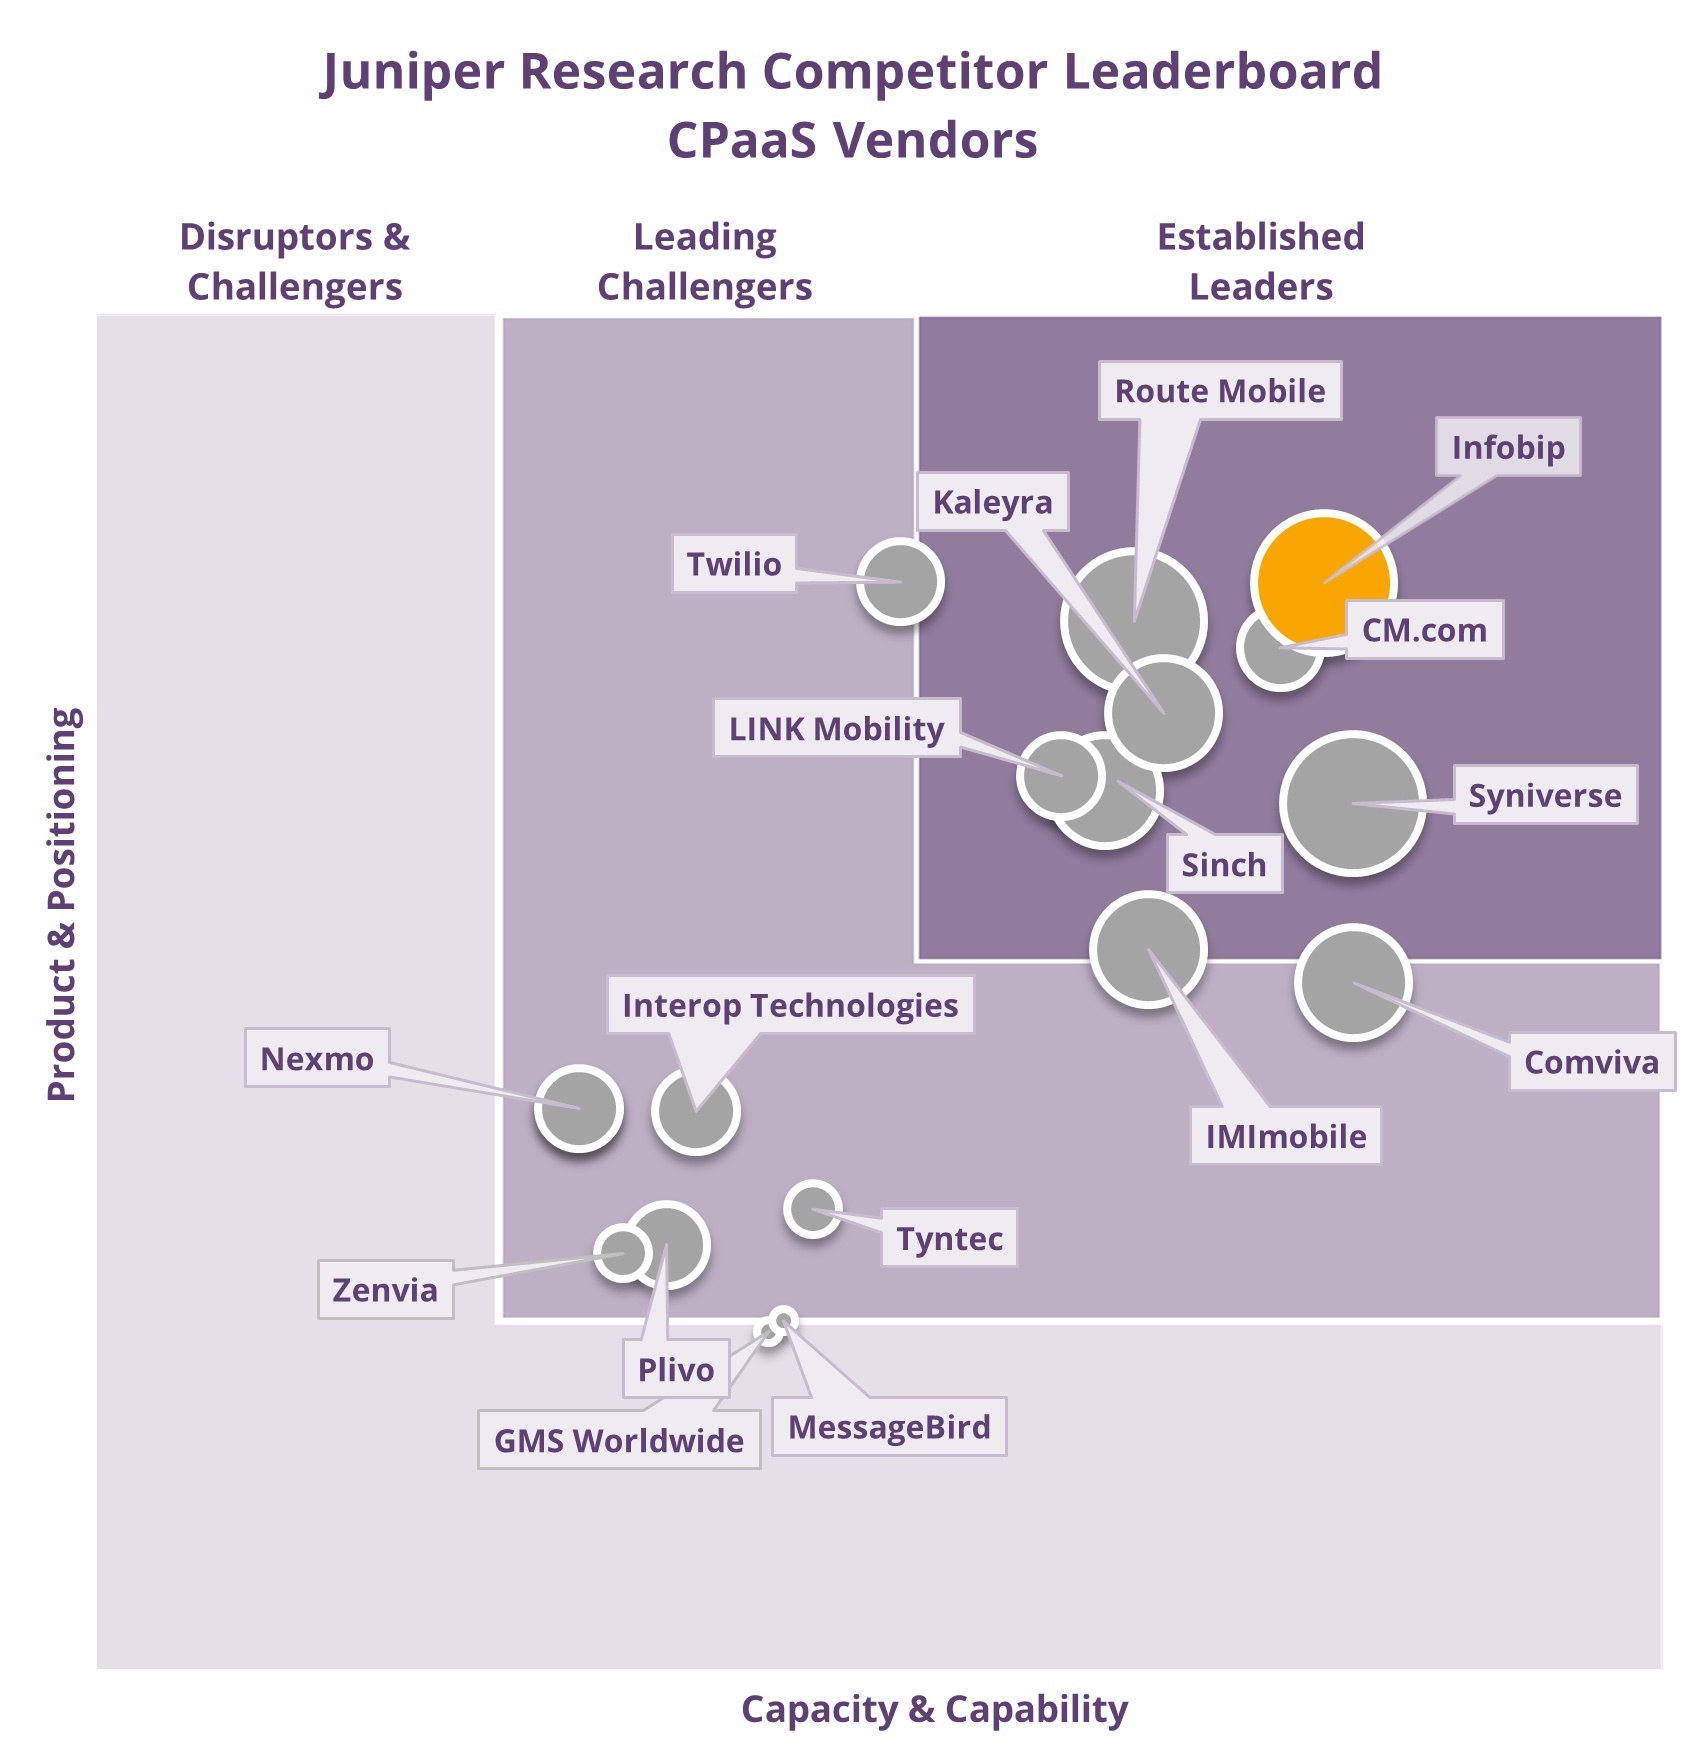 Infobip Recognized as The Established Leader in Juniper's Competitor  Leaderboard for CPaaS